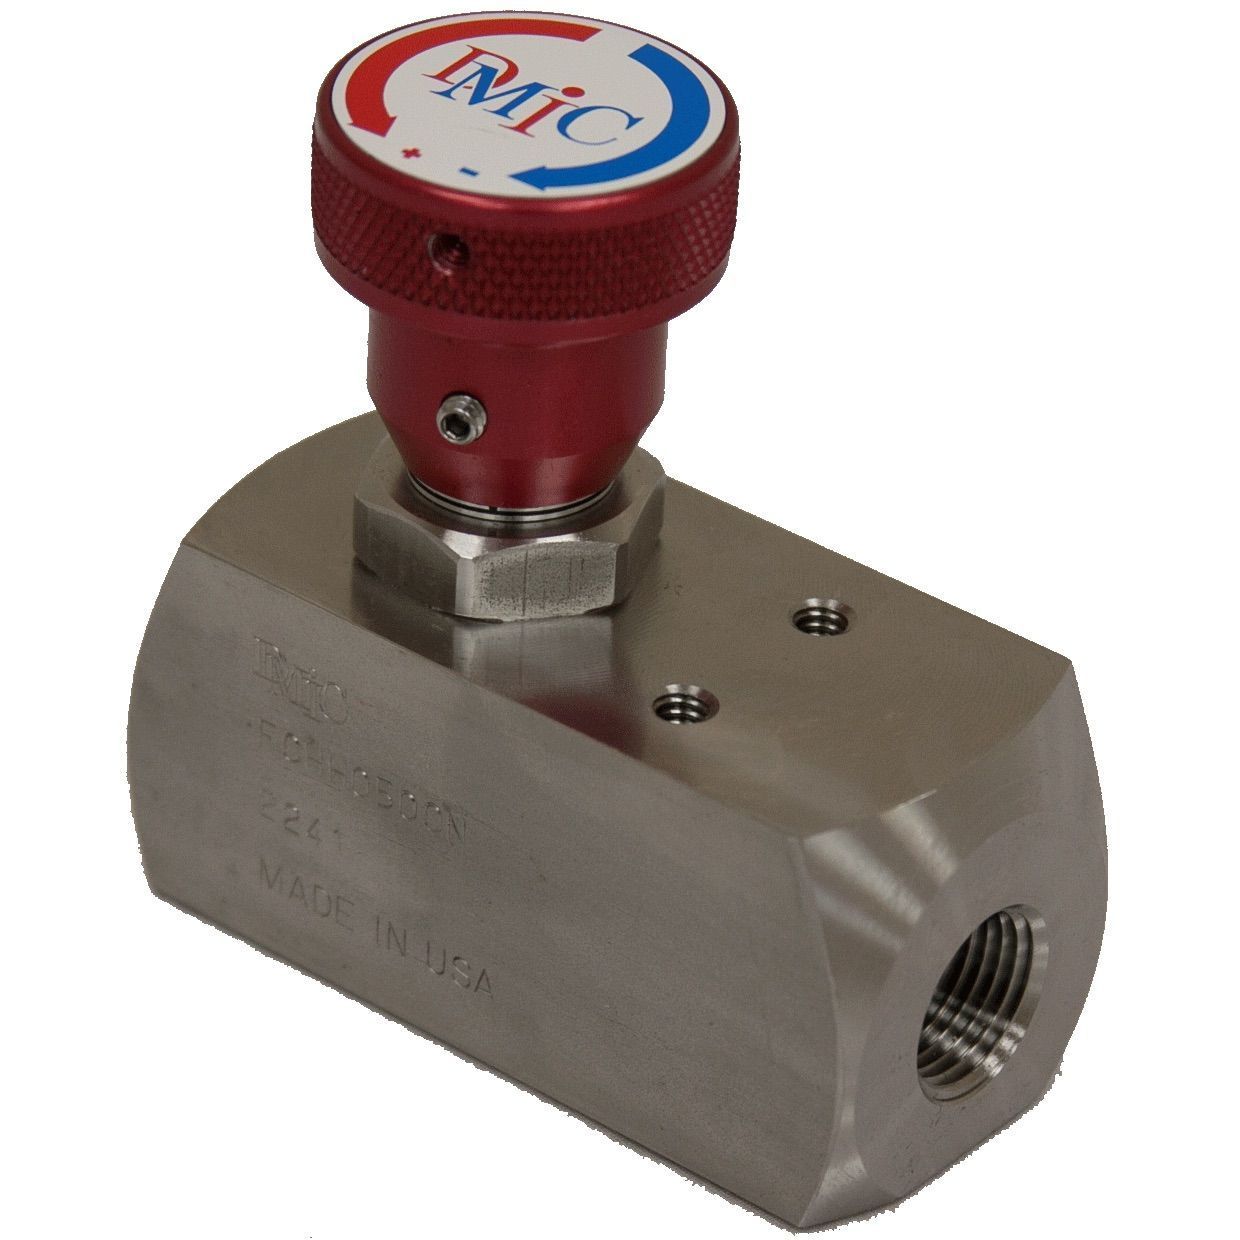 FCHH-1000S-1141 : DMIC Flow Control, Unidirectional, with Integrated Check, #16 SAE (1"), Carbon Steel, 10000psi